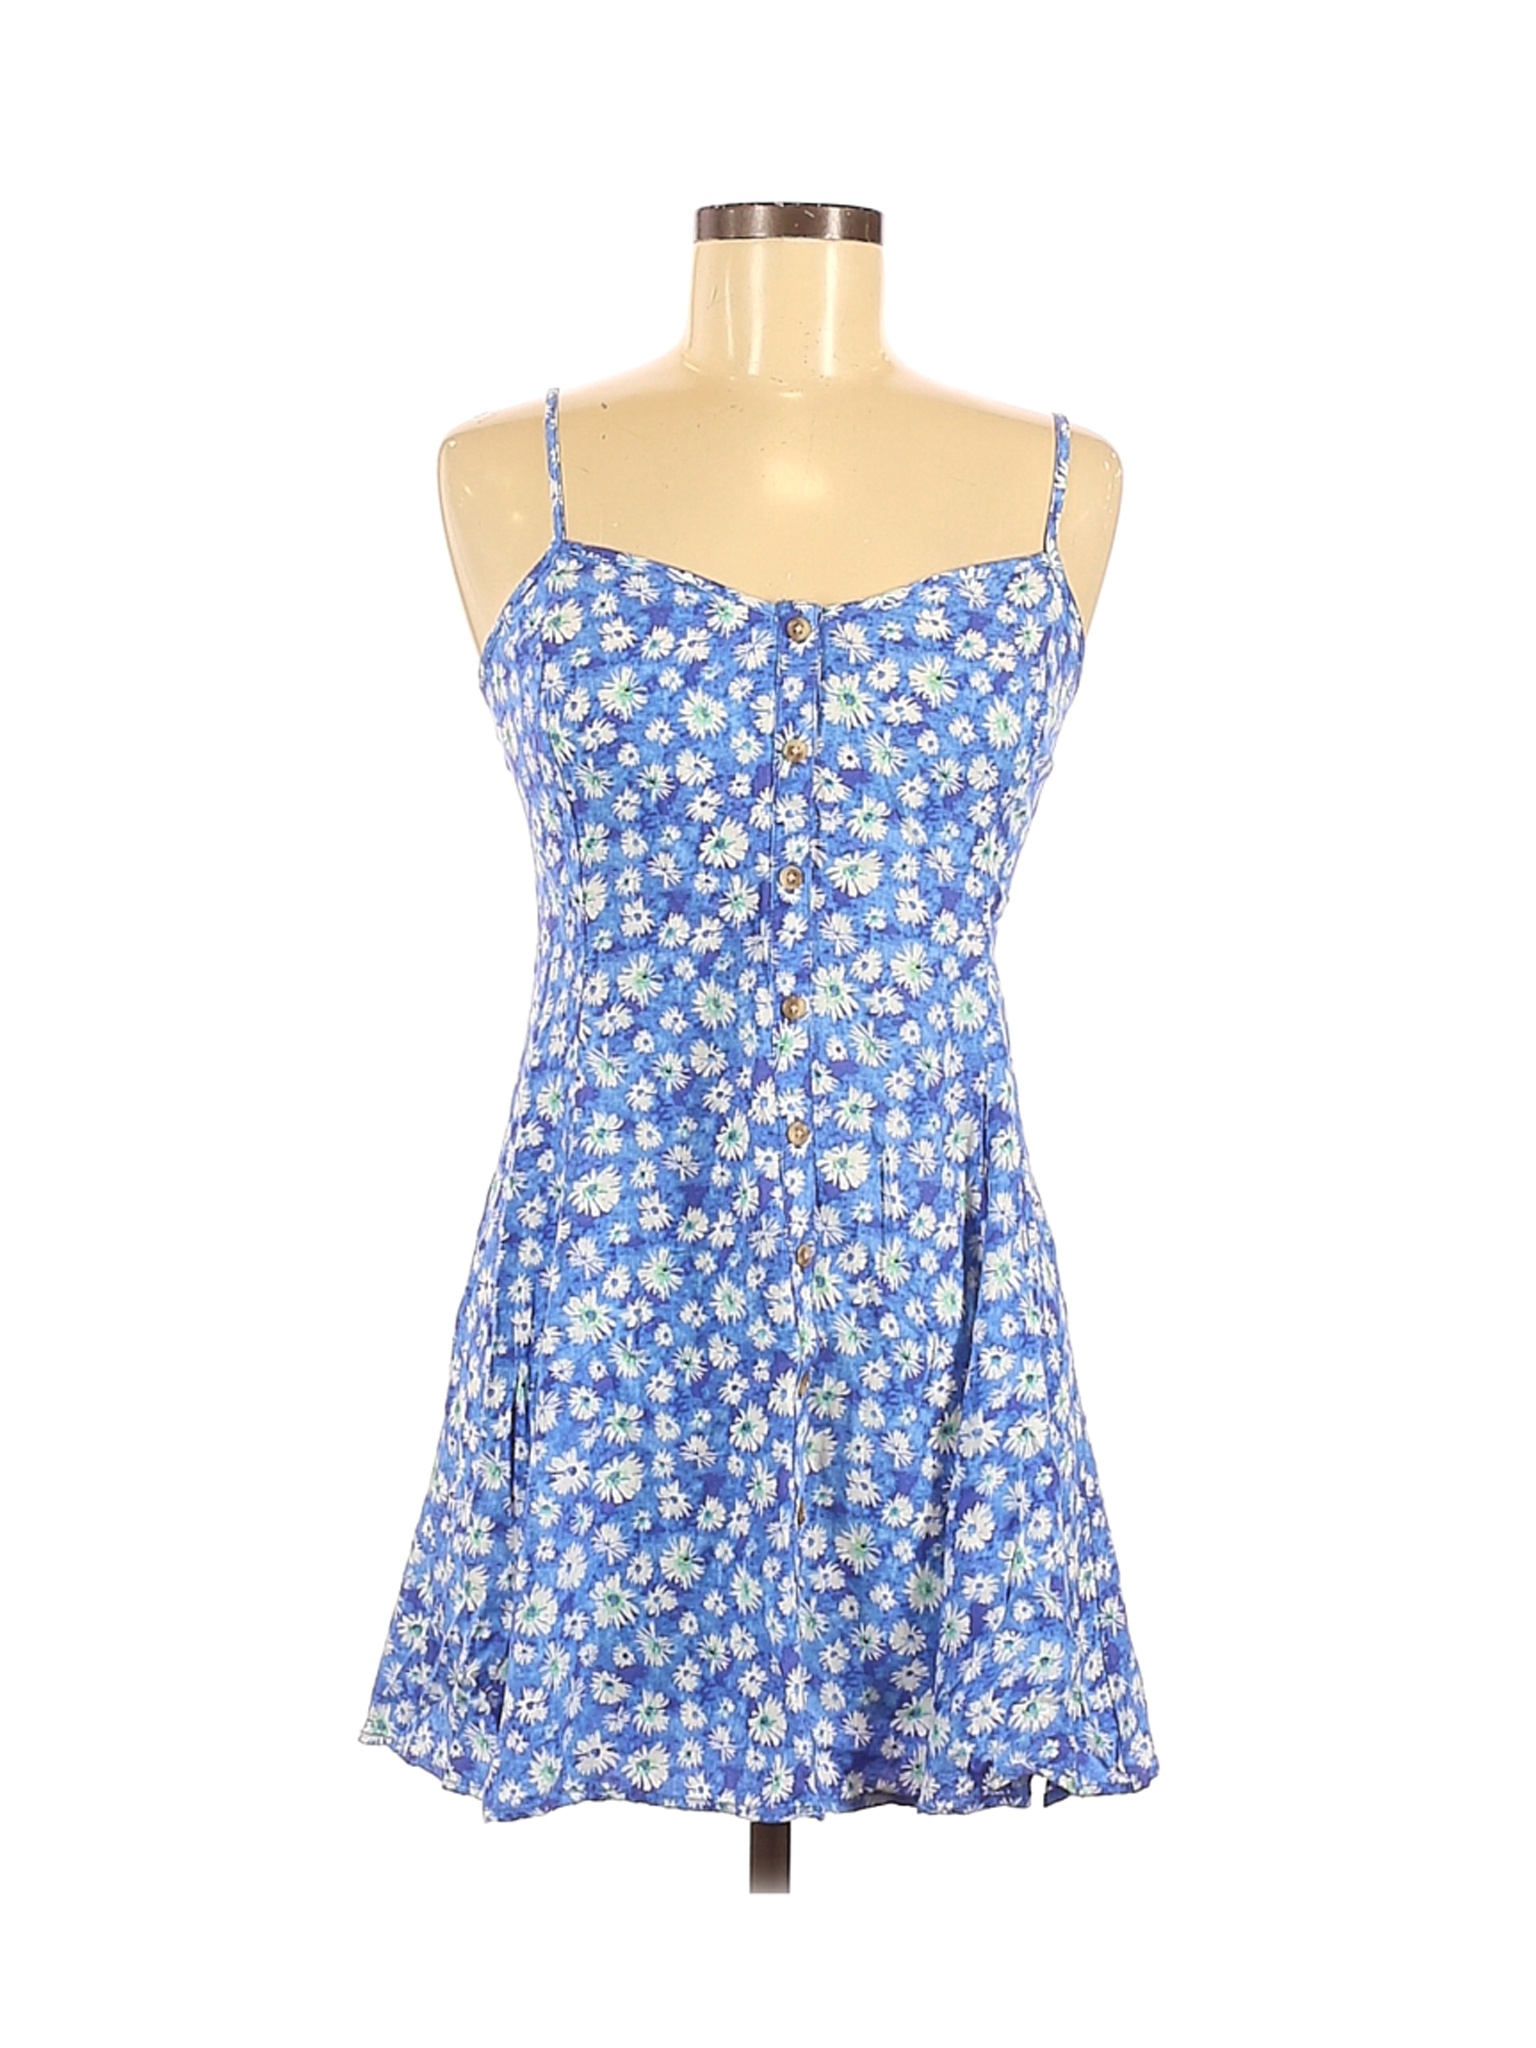 American Eagle Outfitters Women Blue Casual Dress M | eBay